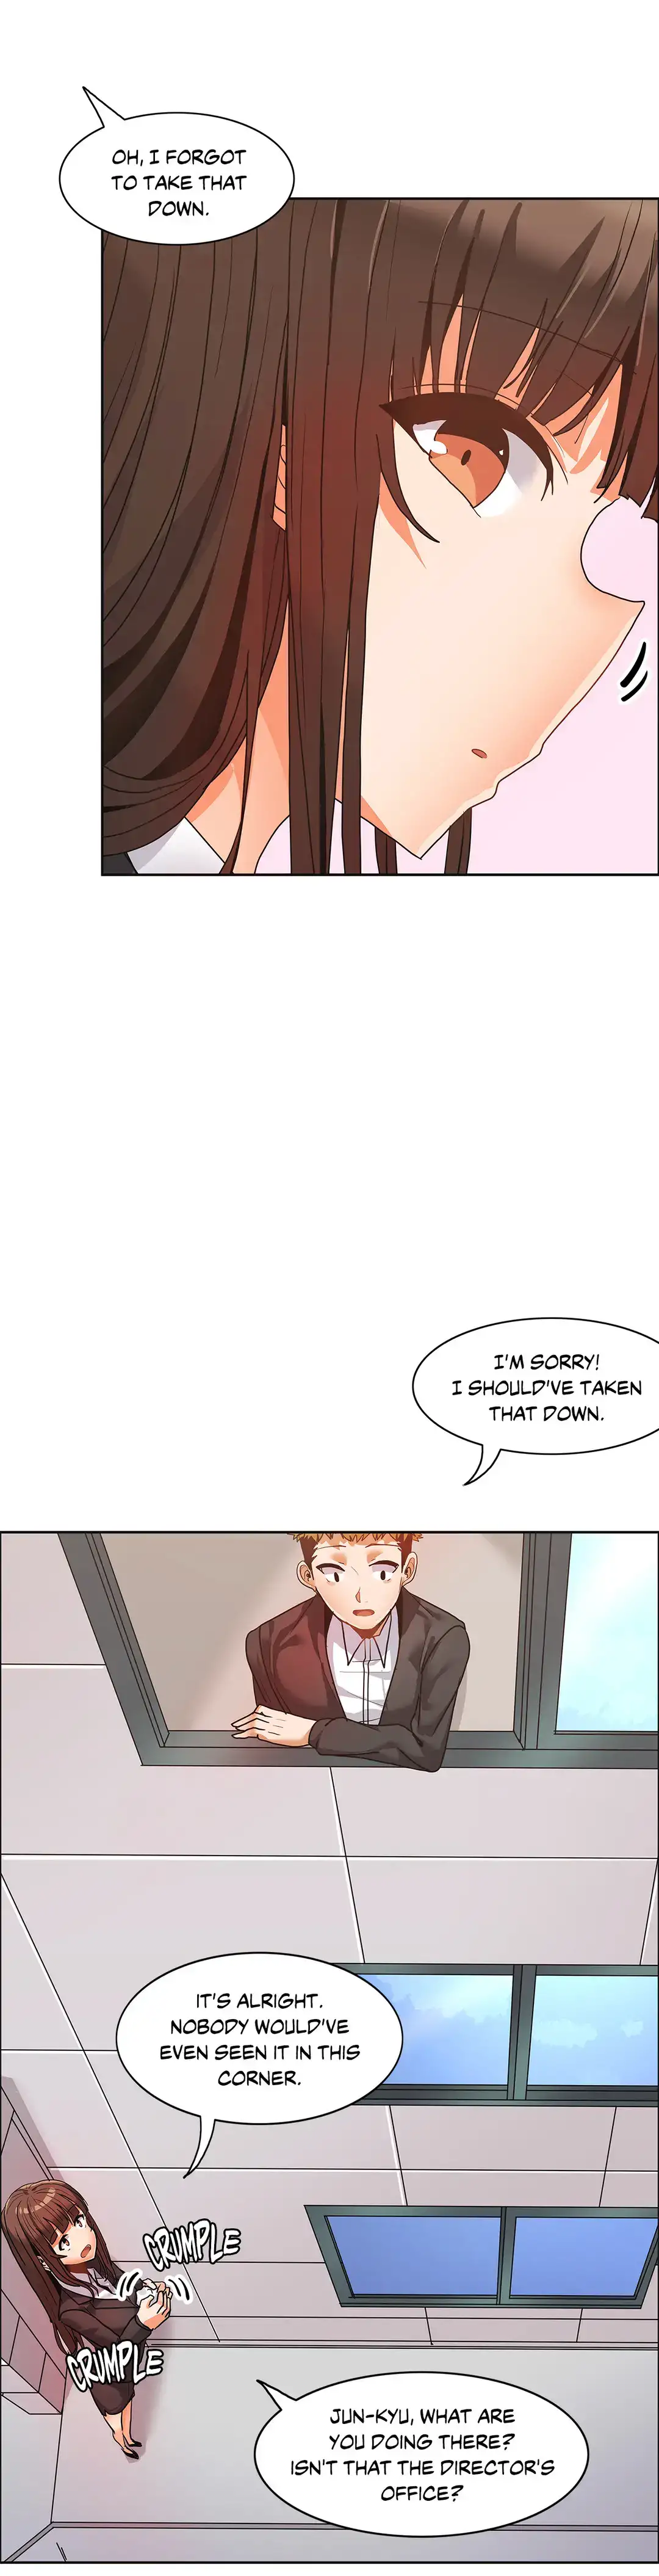 The Girl That Wet the Wall - Chapter 36 Page 5